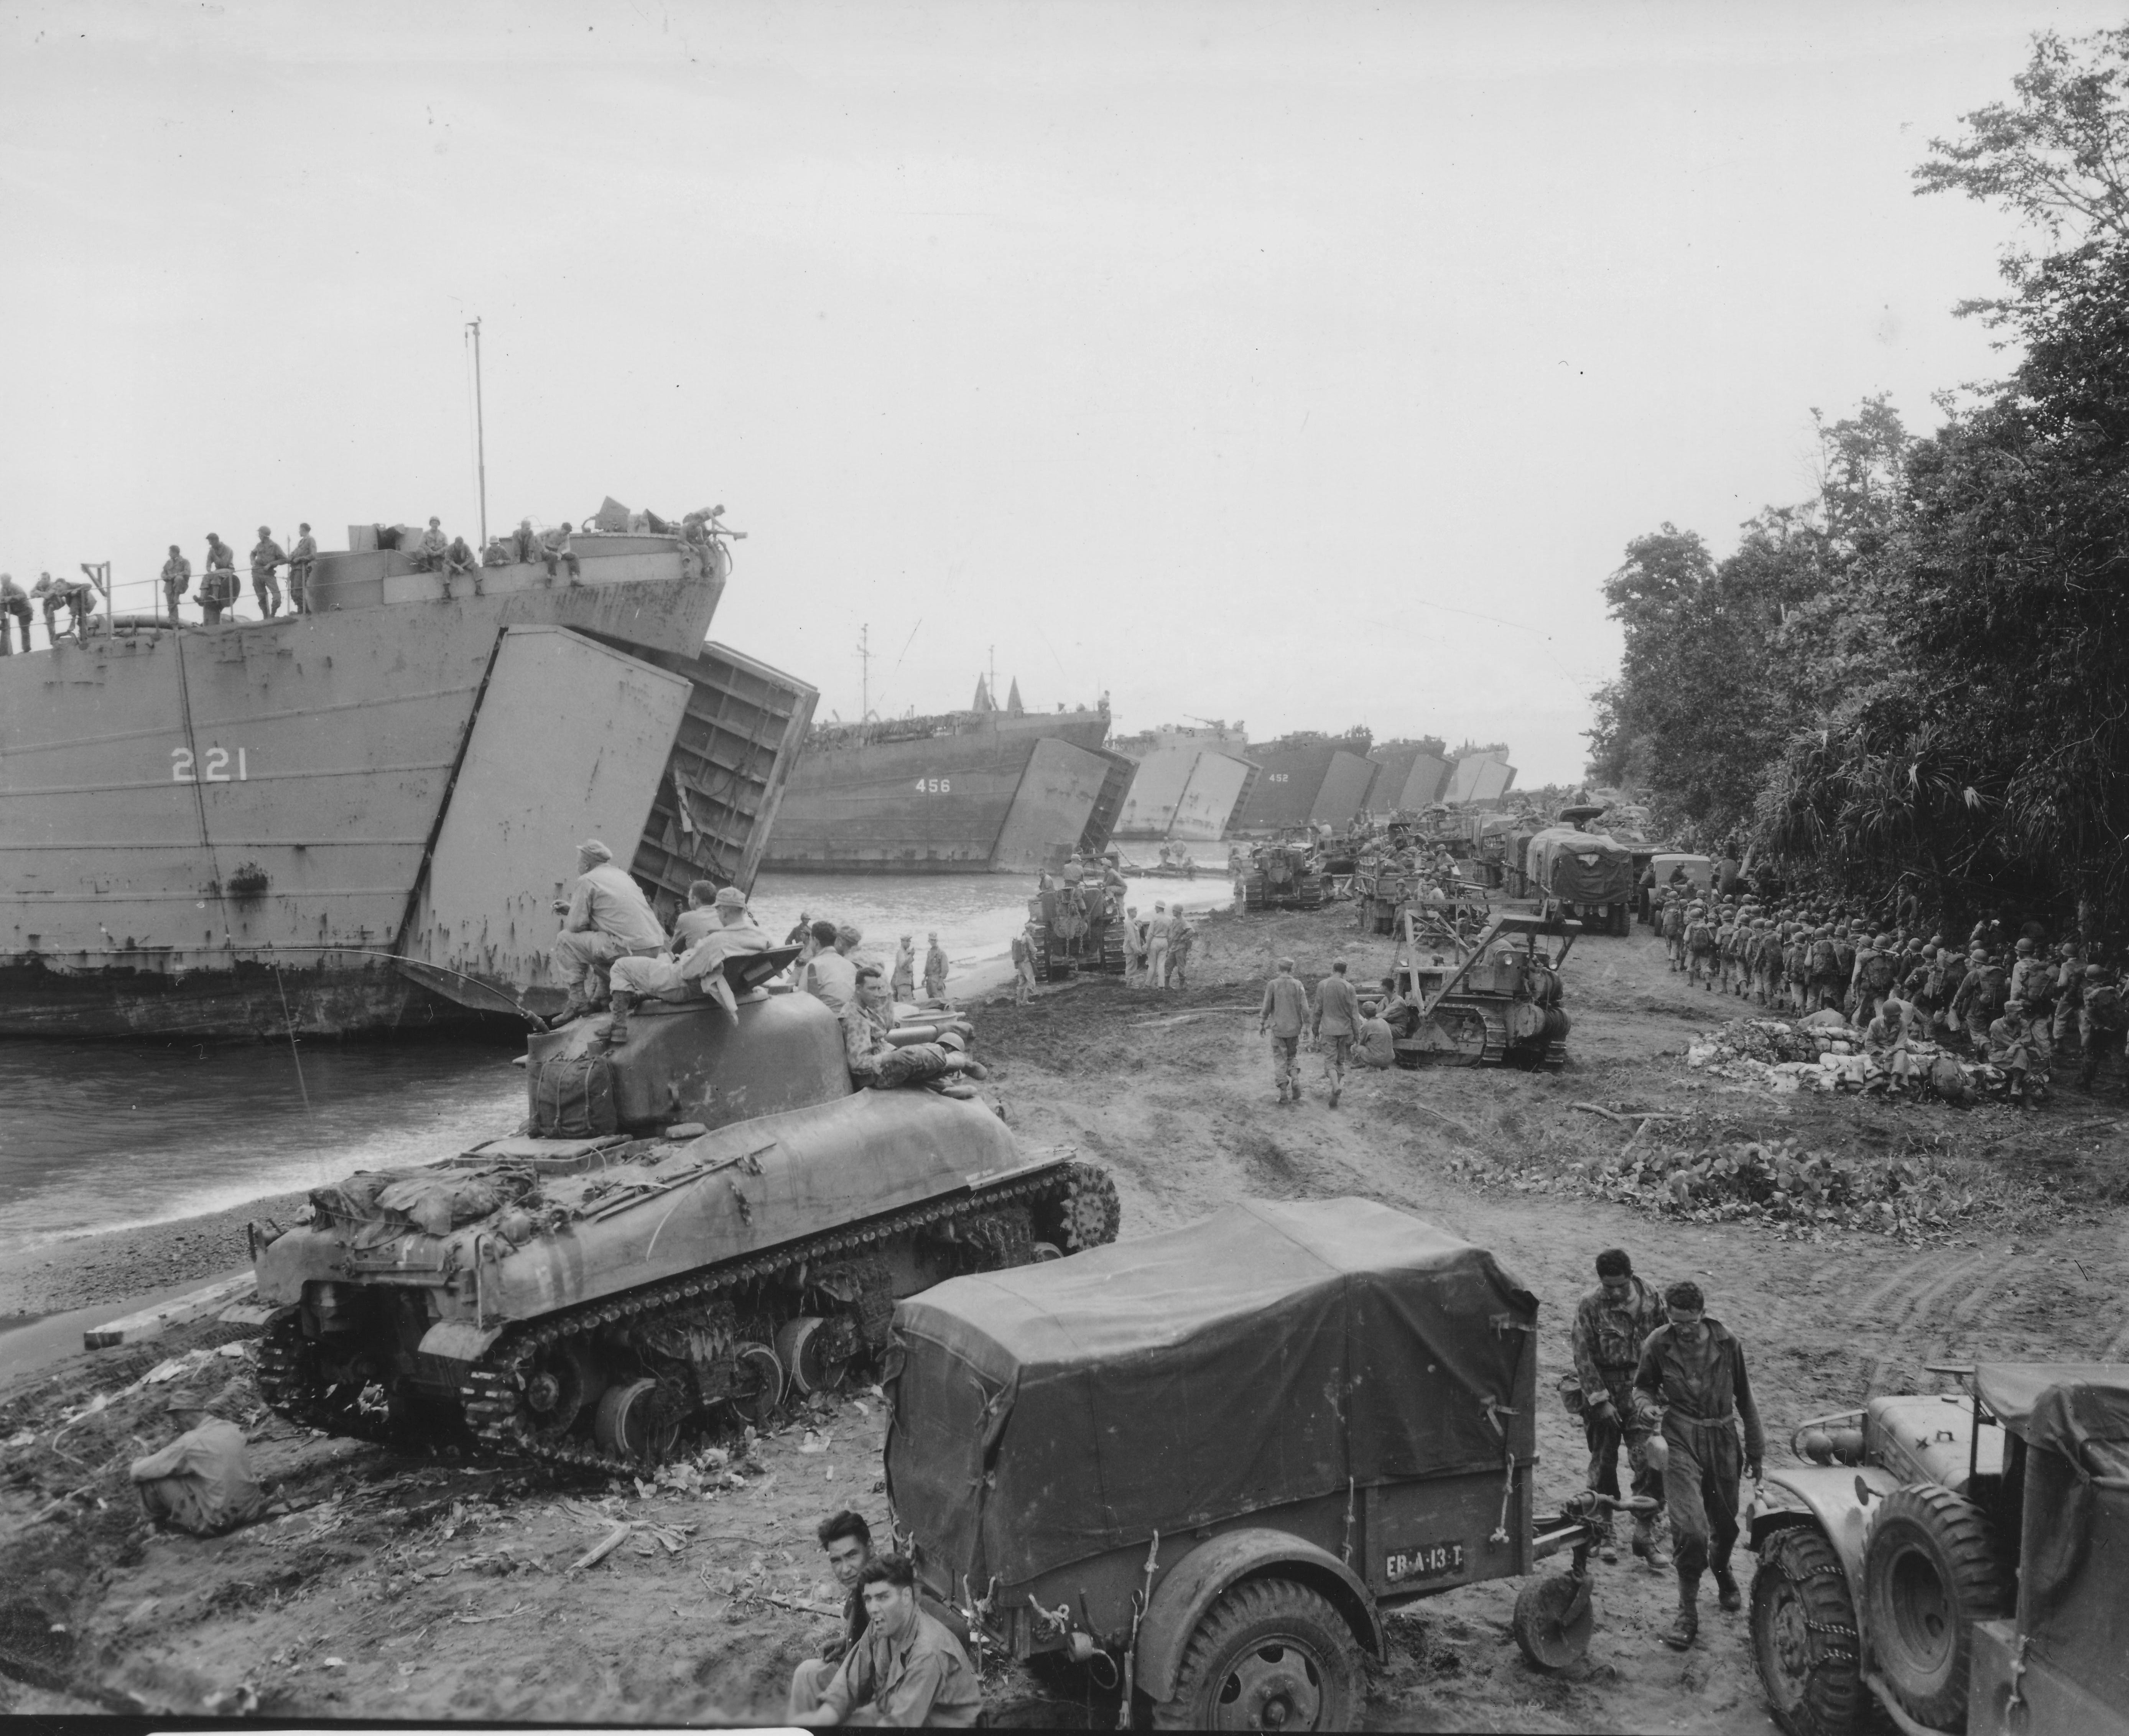 Six US Navy LSTs loading men and equipment during a practice landing near Lae, New Guinea, 10 Apr 1944; note M4 Sherman tank, Dodge Weapons Carrier, GMC CCKW 2 1/2-ton 6x6 trucks